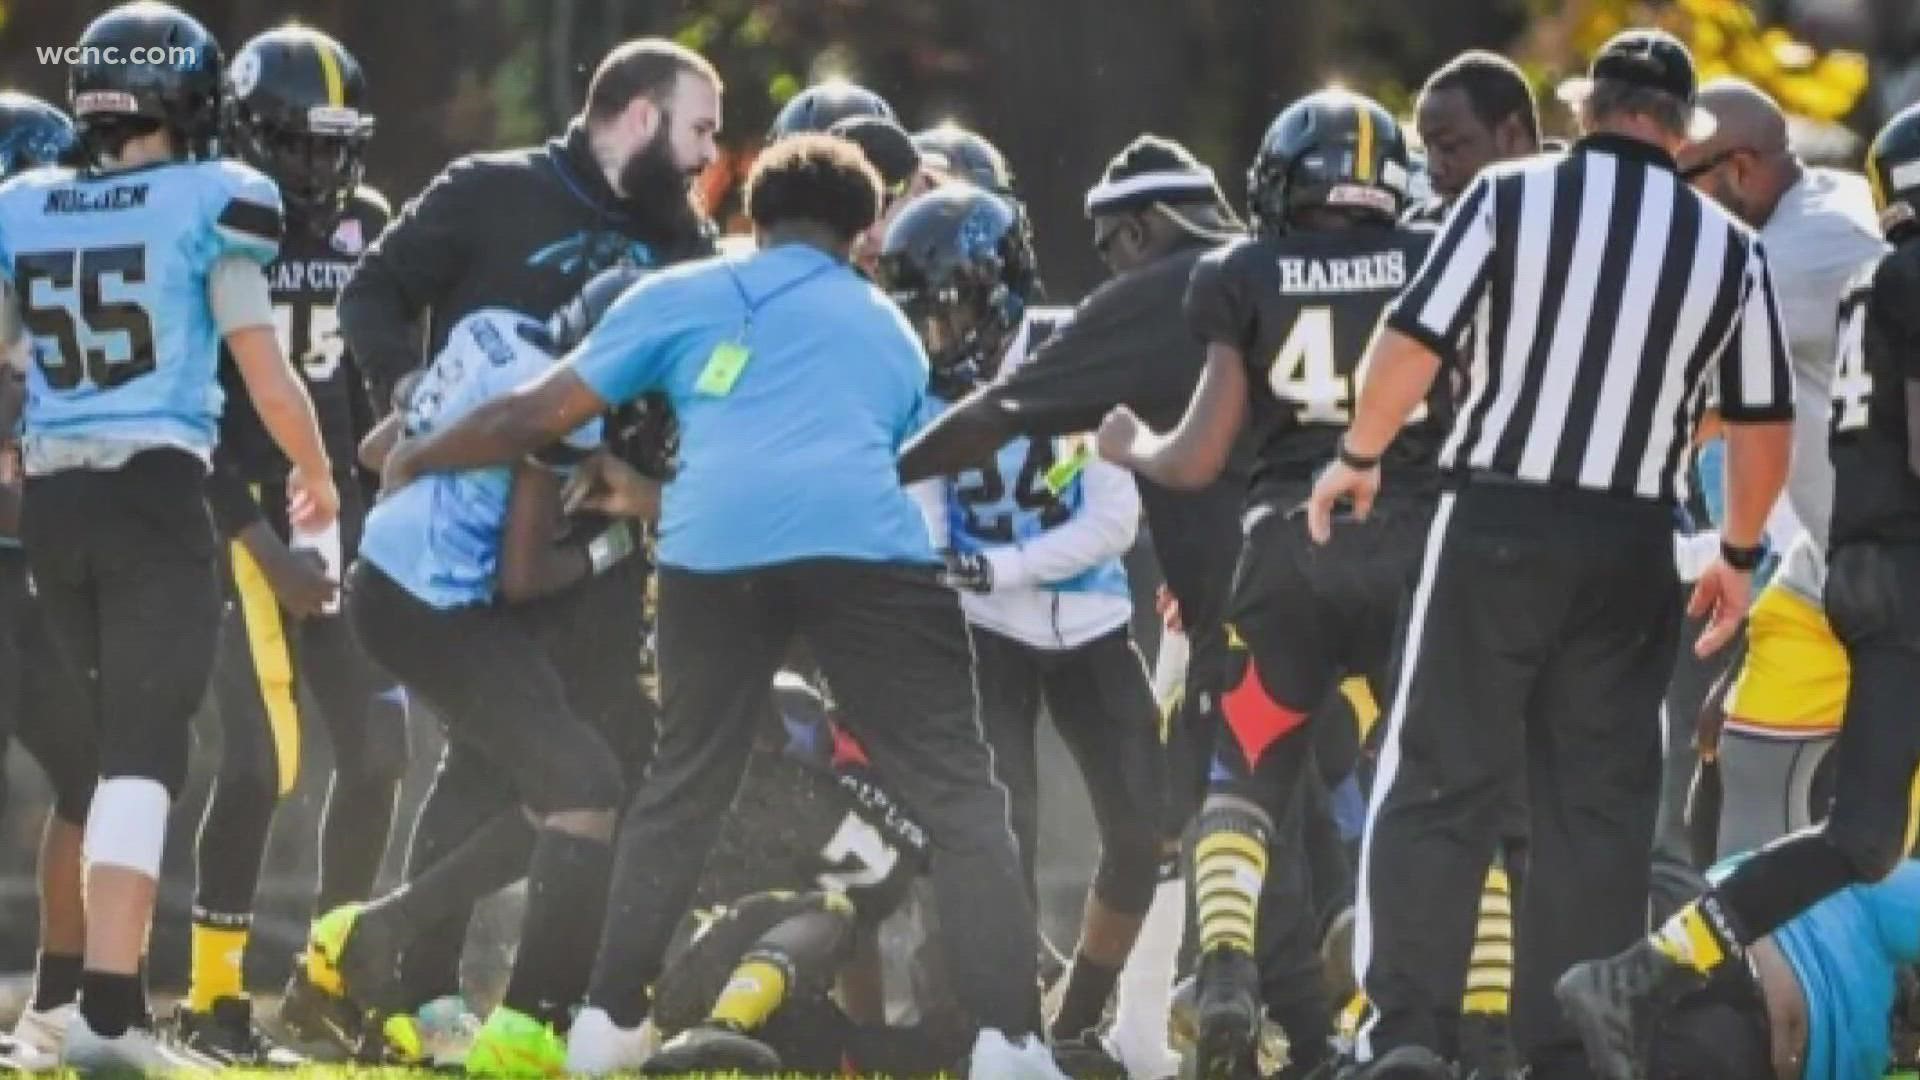 Fans recorded the brawl on their cell phones during a Pop Warner playoff game in Cary last Saturday.